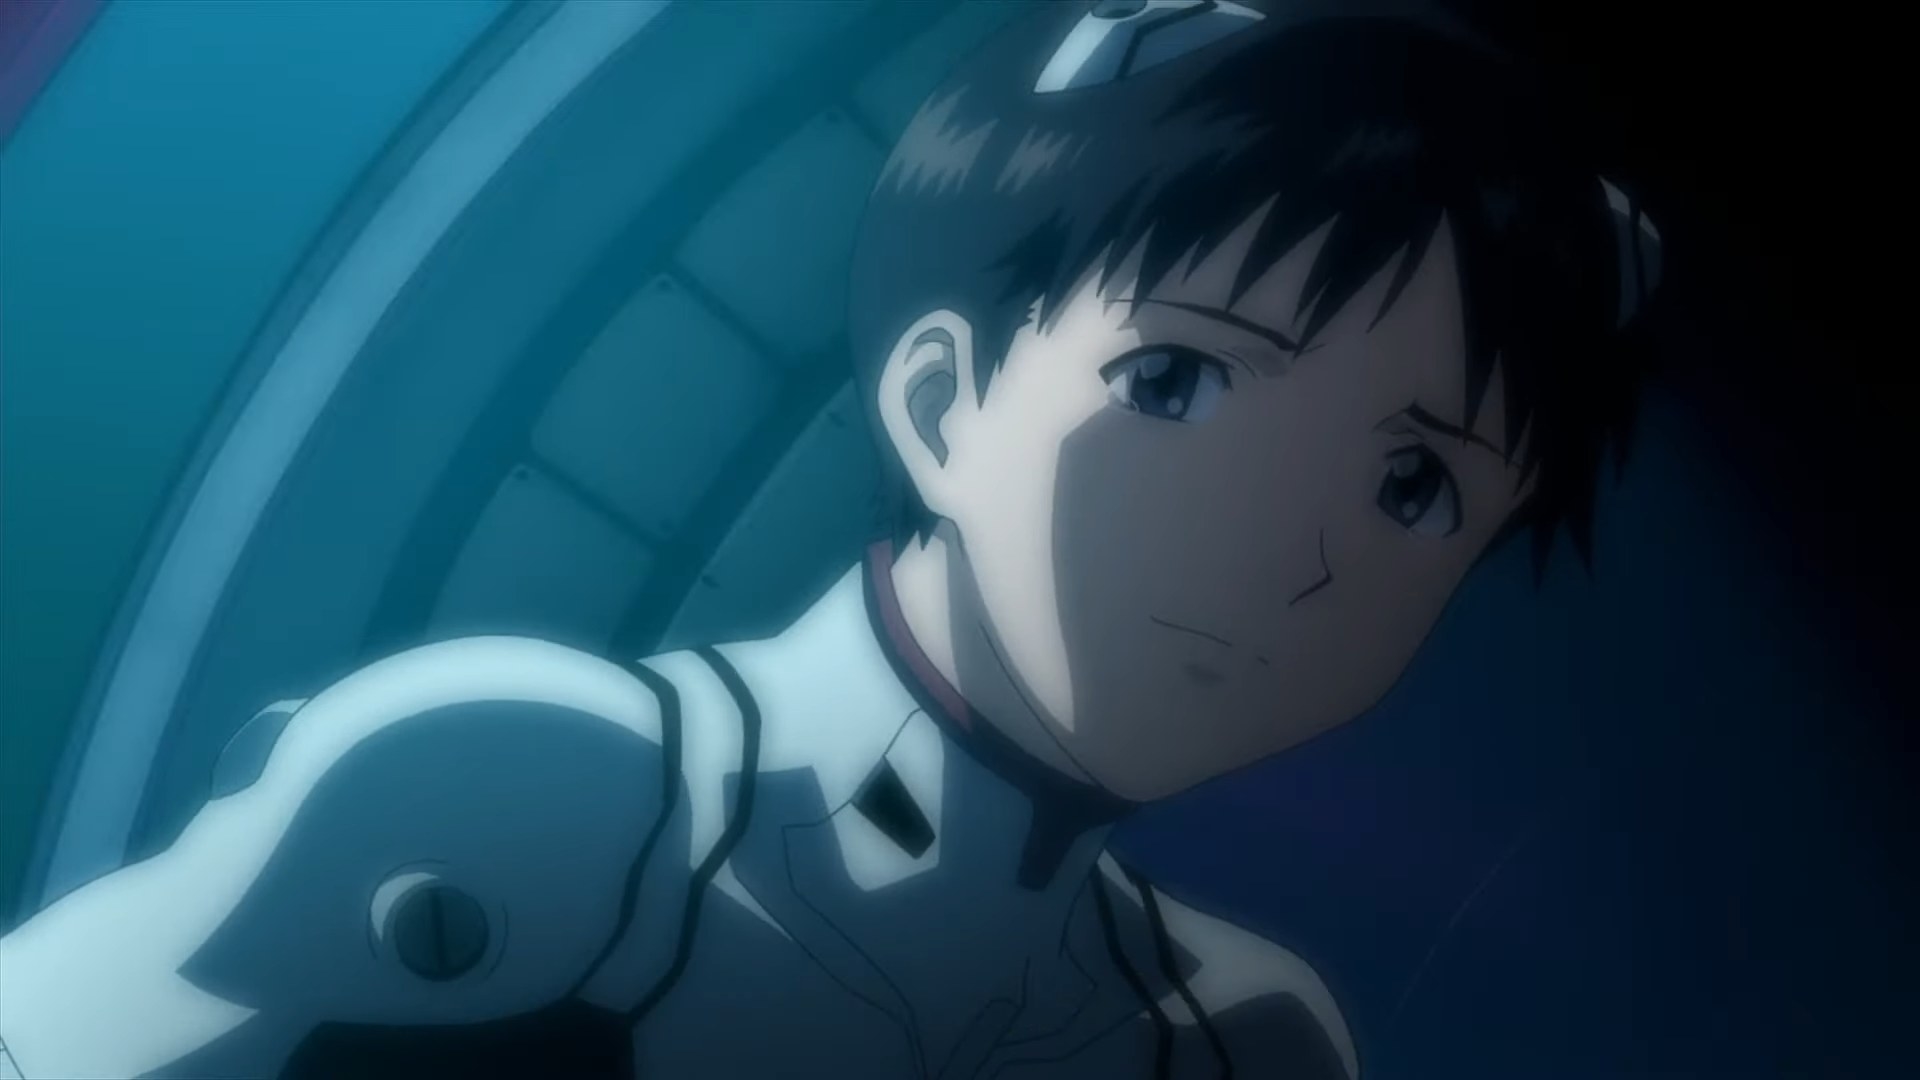 Shinji smiling in his plug suit in &quot;Evangelion: 1.0 You Are (Not) Alone&quot;